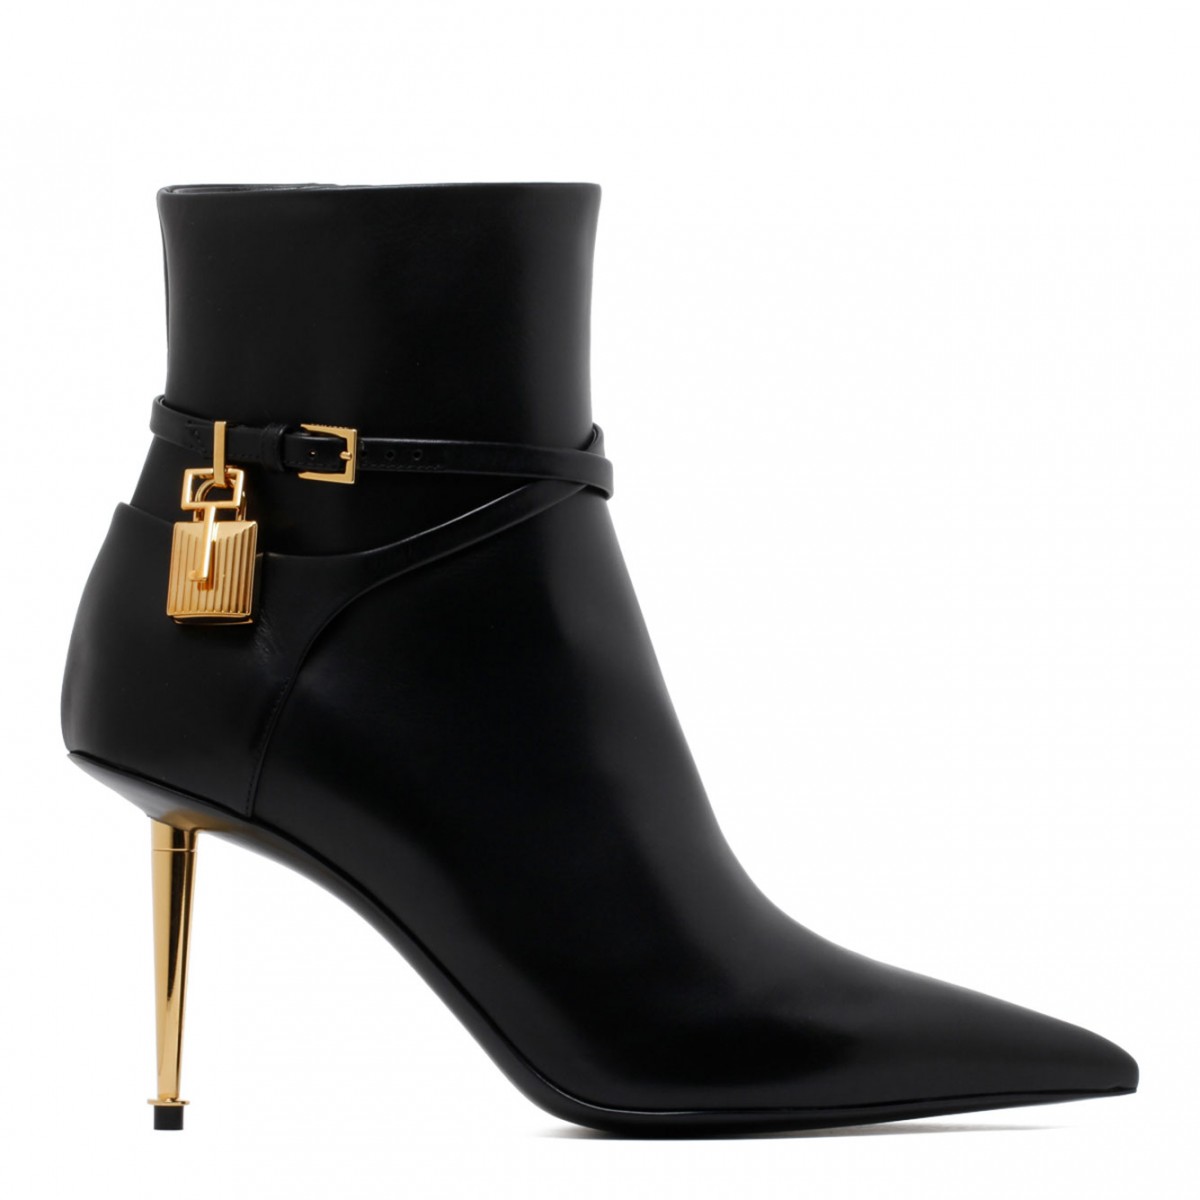 Tom Ford Black Leather 80mm Pointed Toe Boots